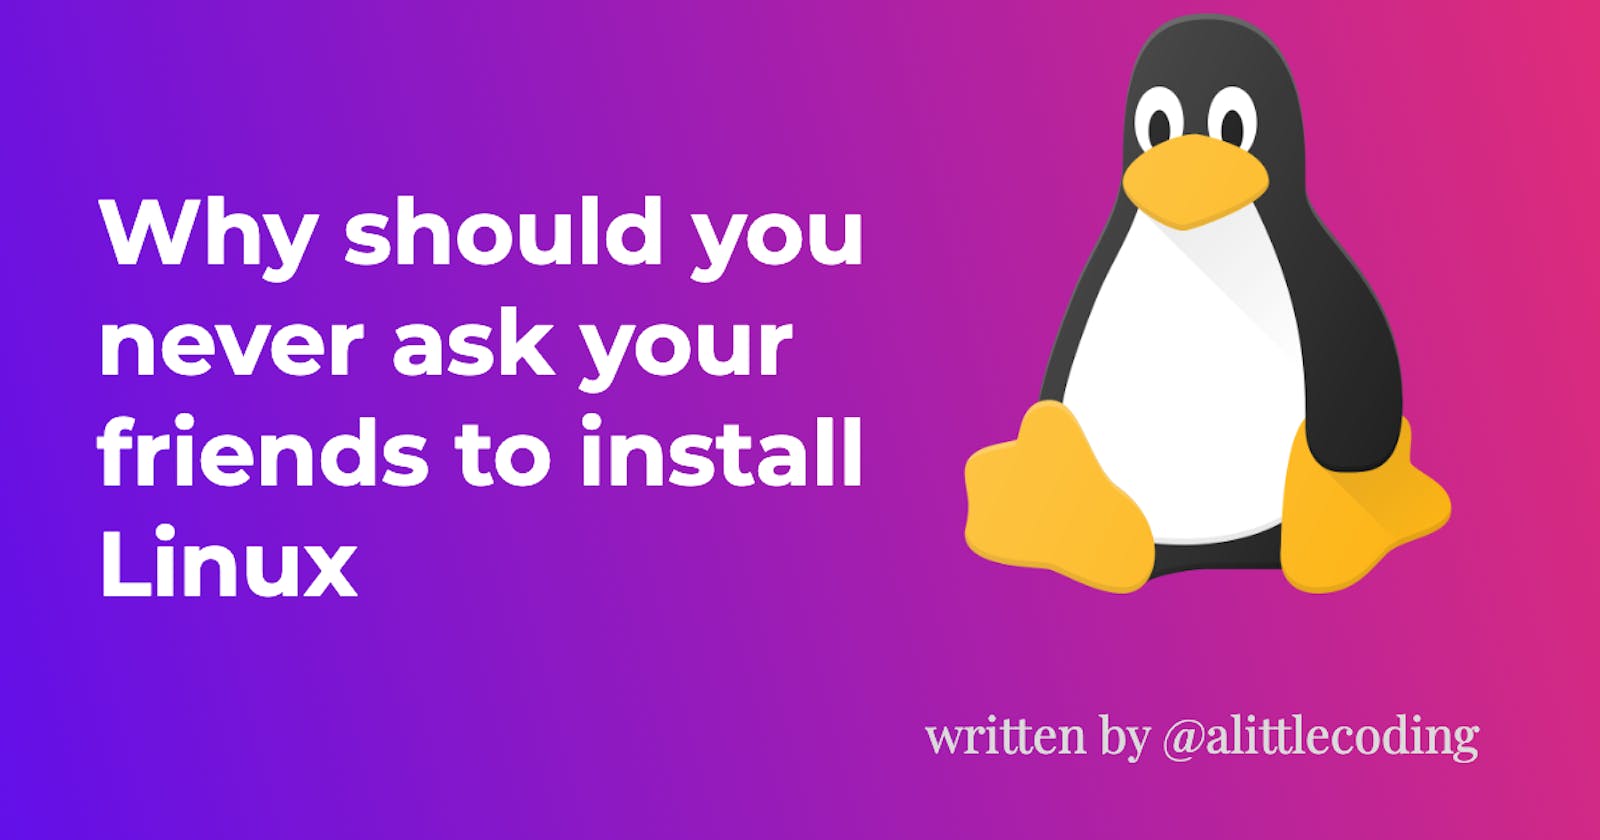 Why should you never ask your friends to install Linux?